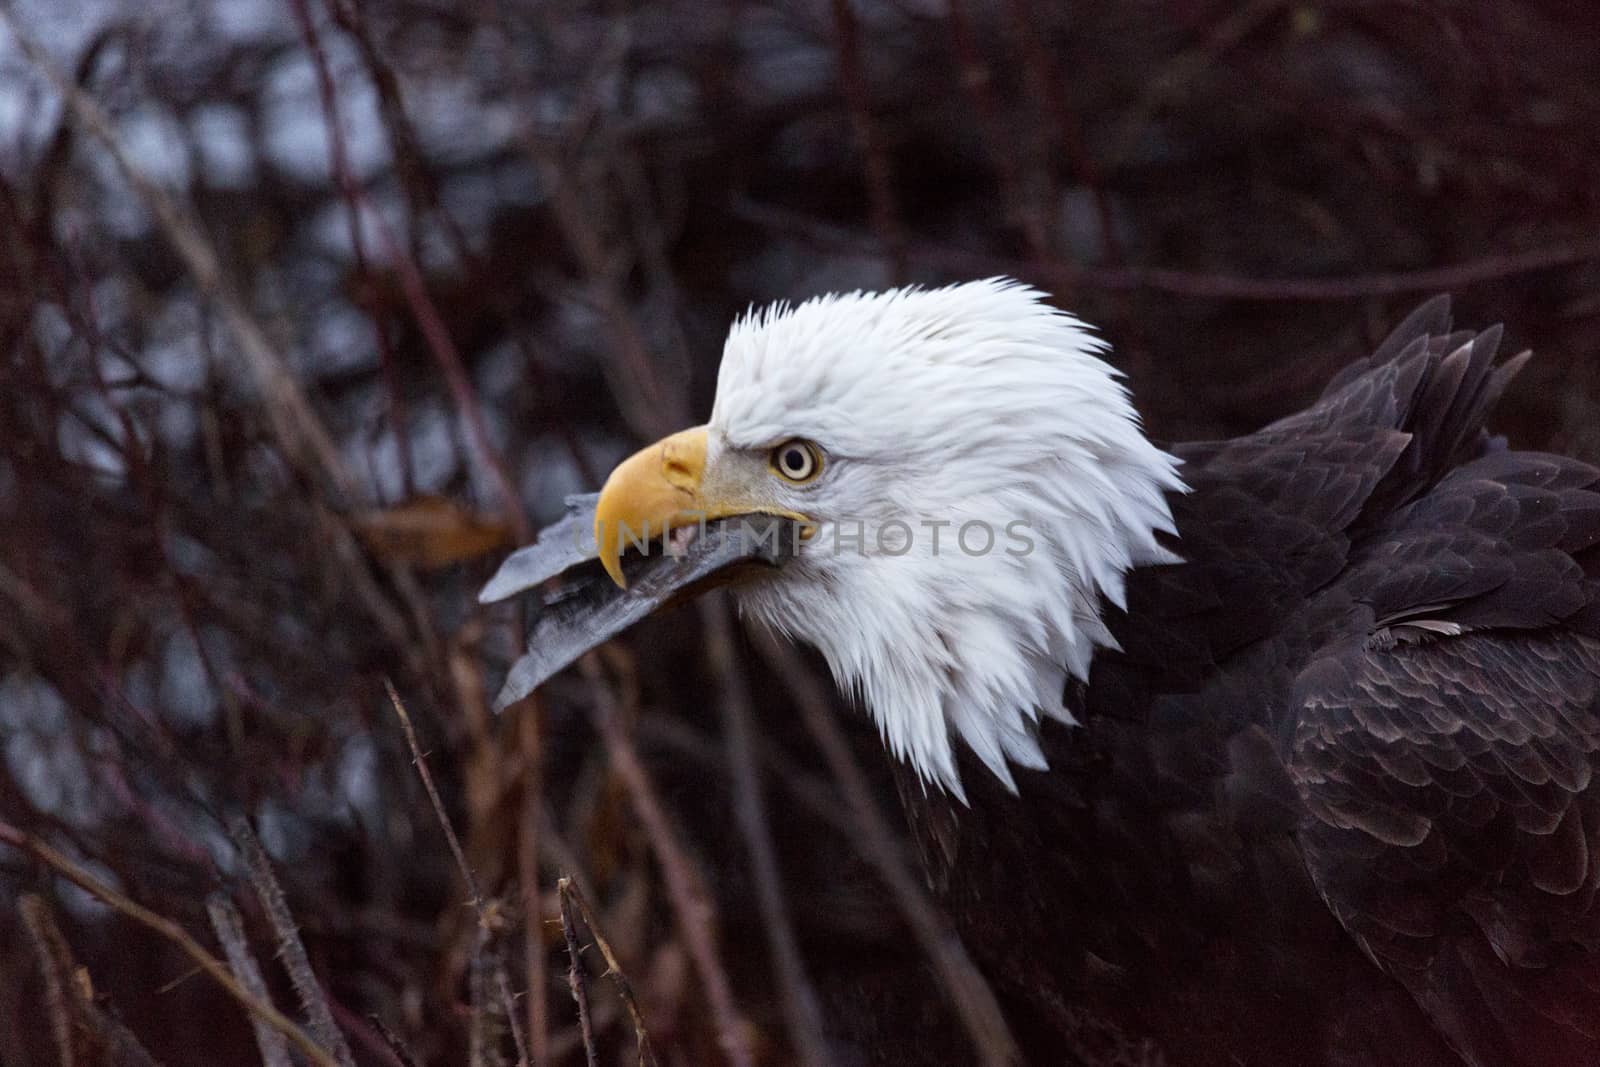 Wild bald eagle gulps fish, tail in its beak, on the banks of the Chilkat River in Haines, Alaska.  Birds of prey are natural attractions for bird watchers, nature lovers, and travelers. Bald eagle is America's national bird. 